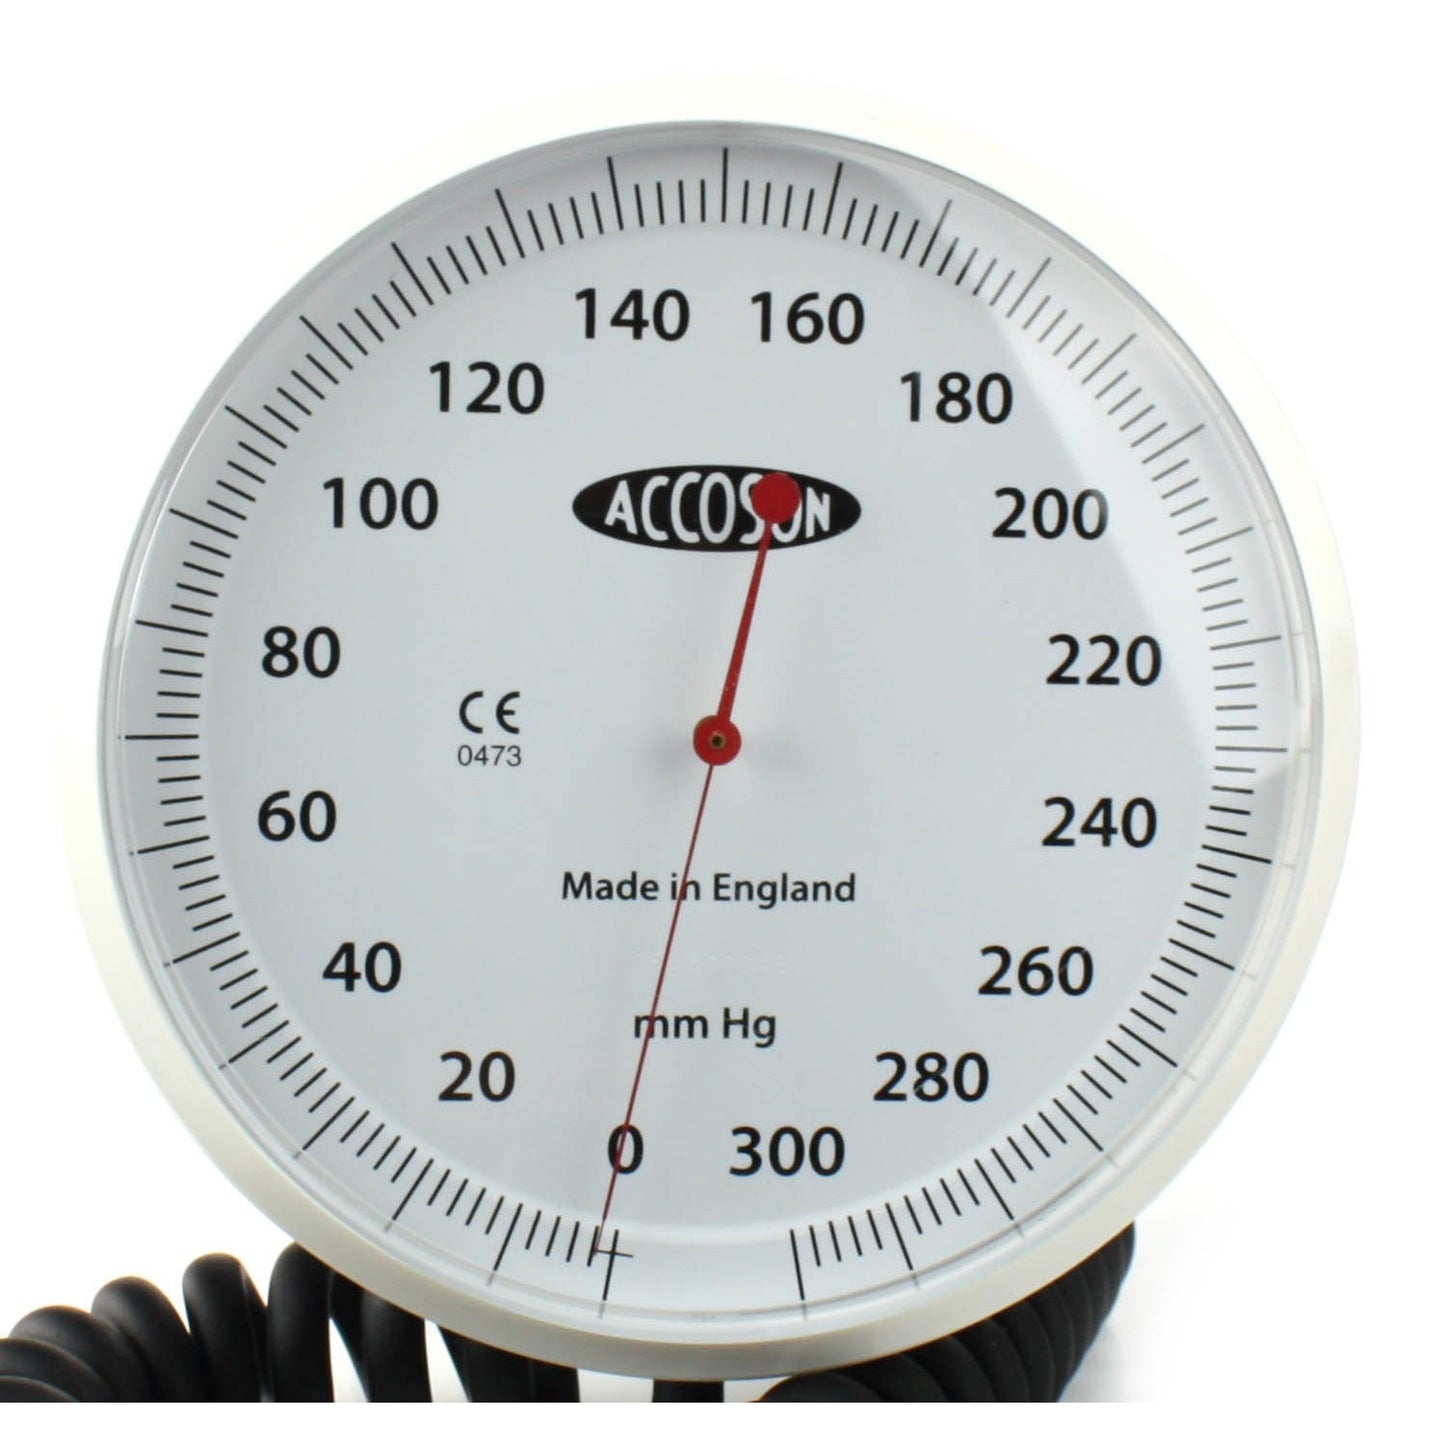 Accoson 6 Inch Aneroid Sphyg Wall Model - GAUGE ONLY